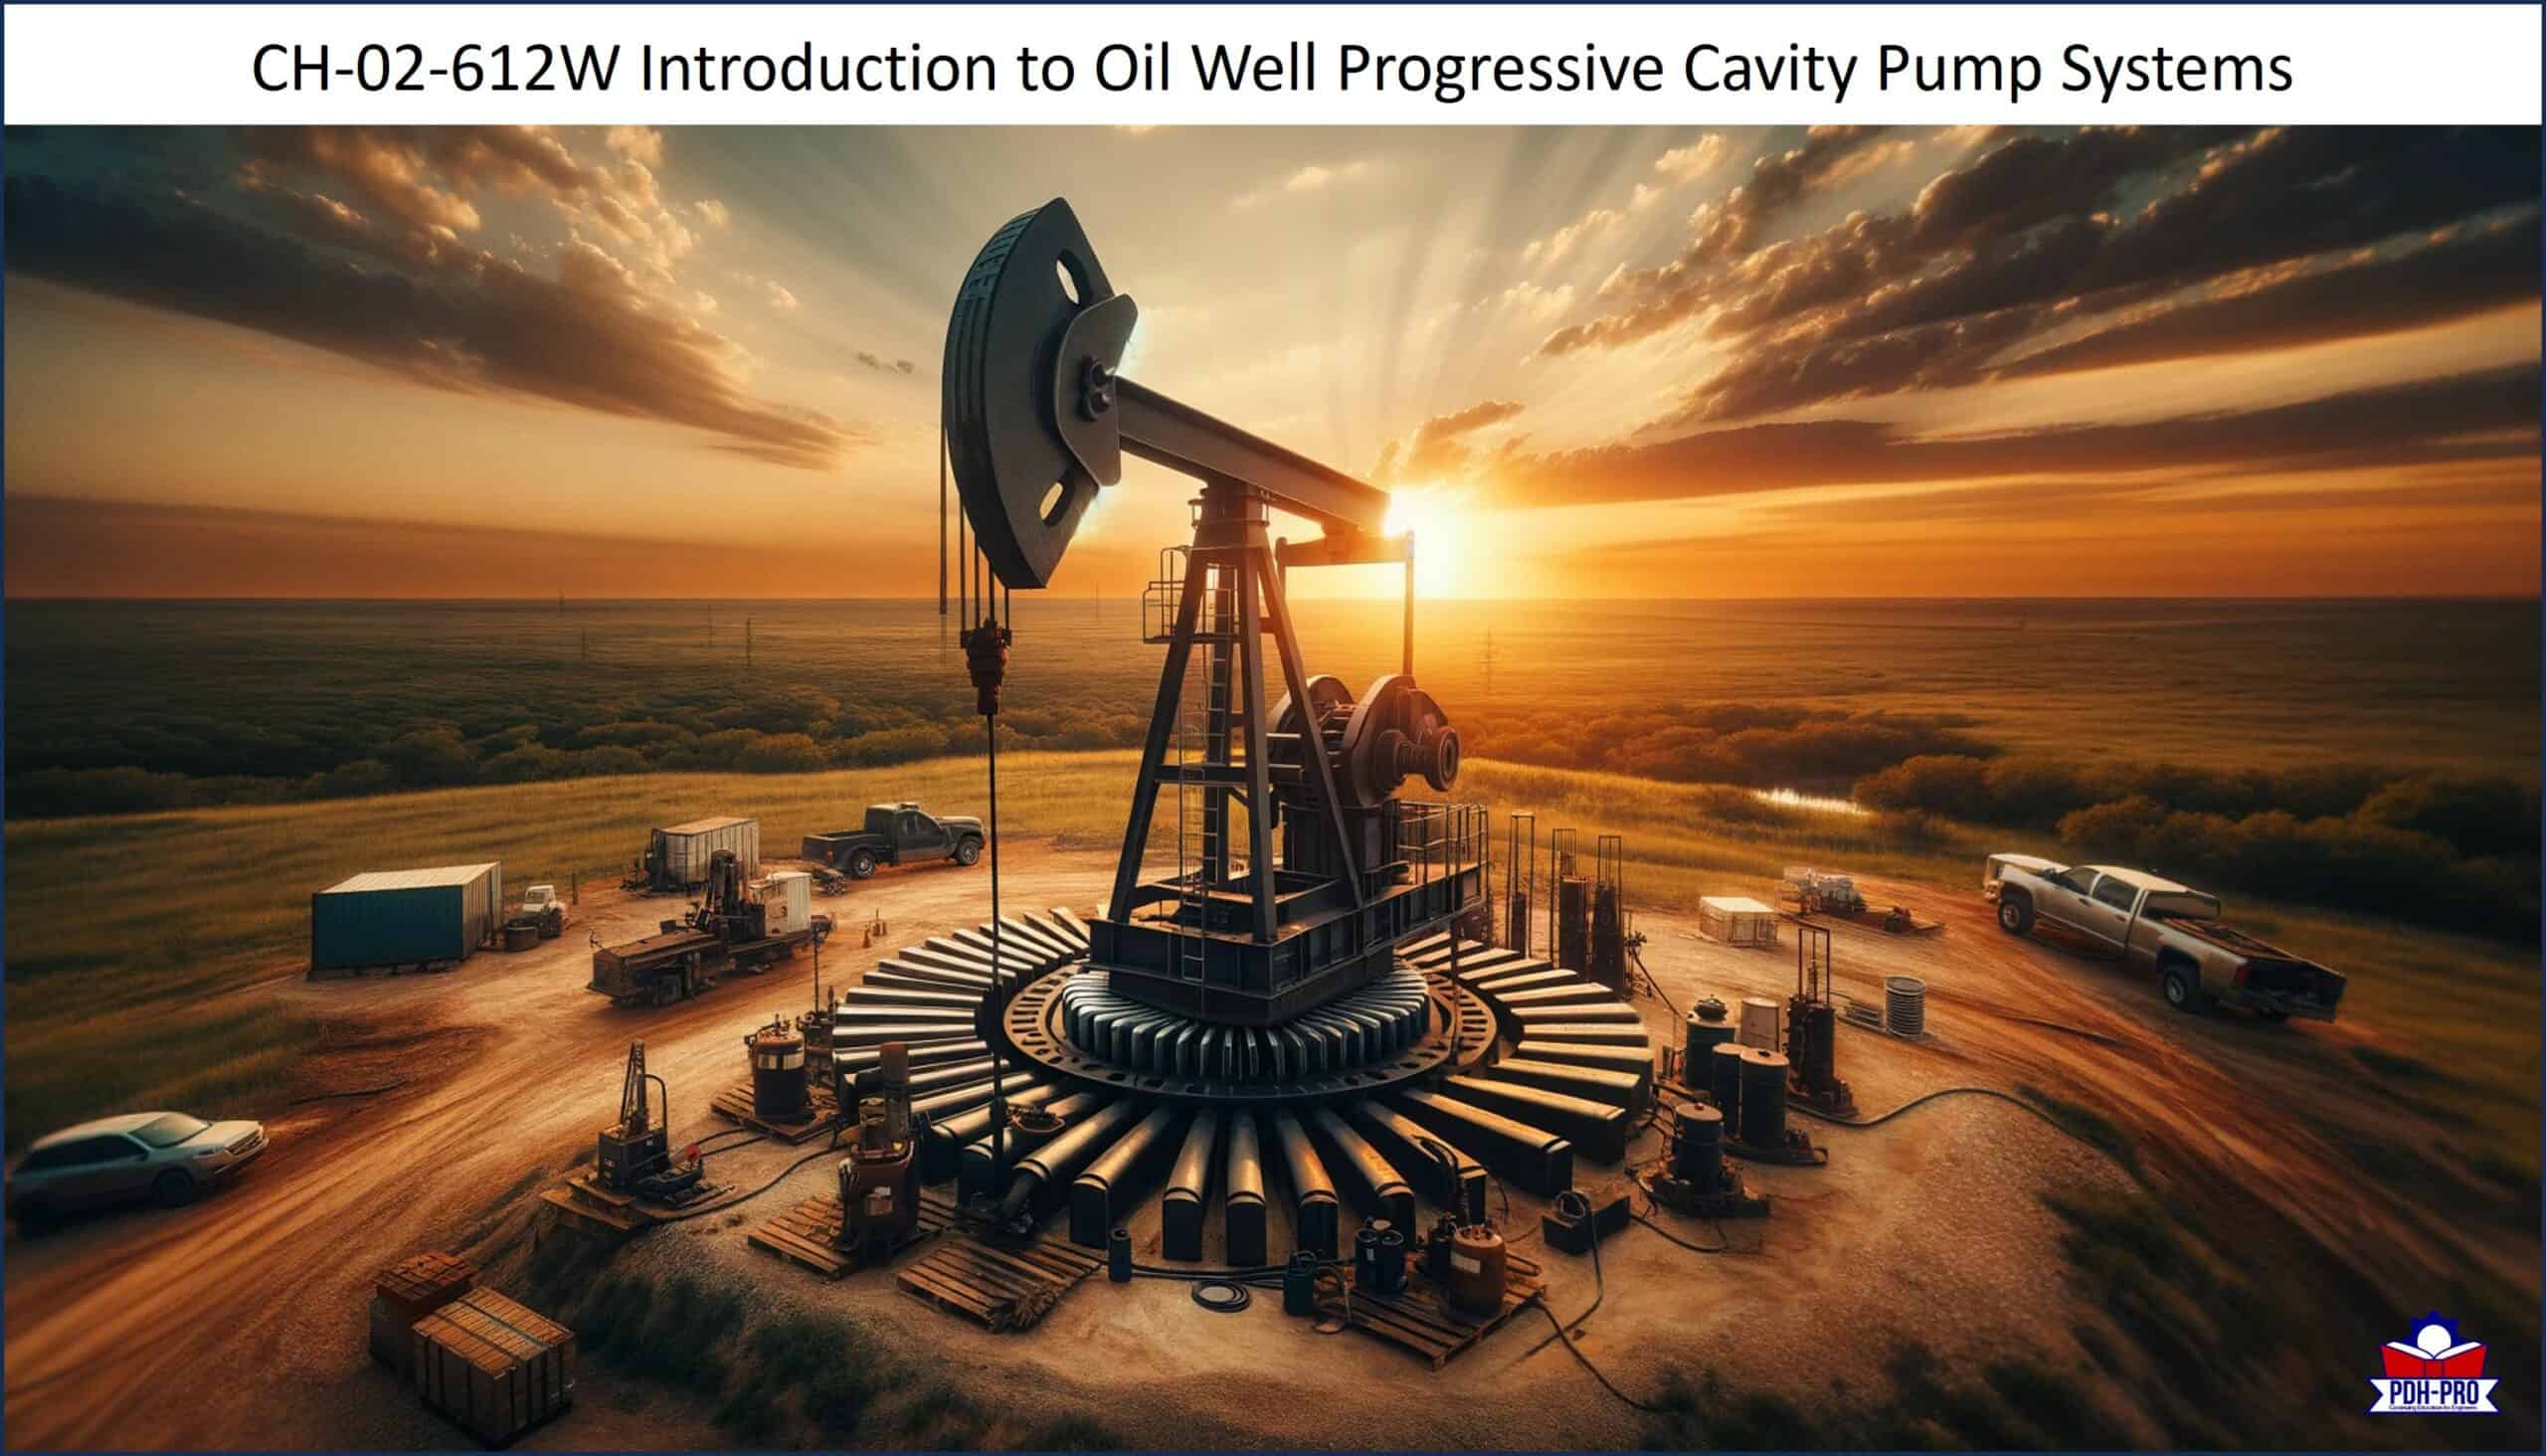 Introduction to Oil Well Progressive Cavity Pump Systems